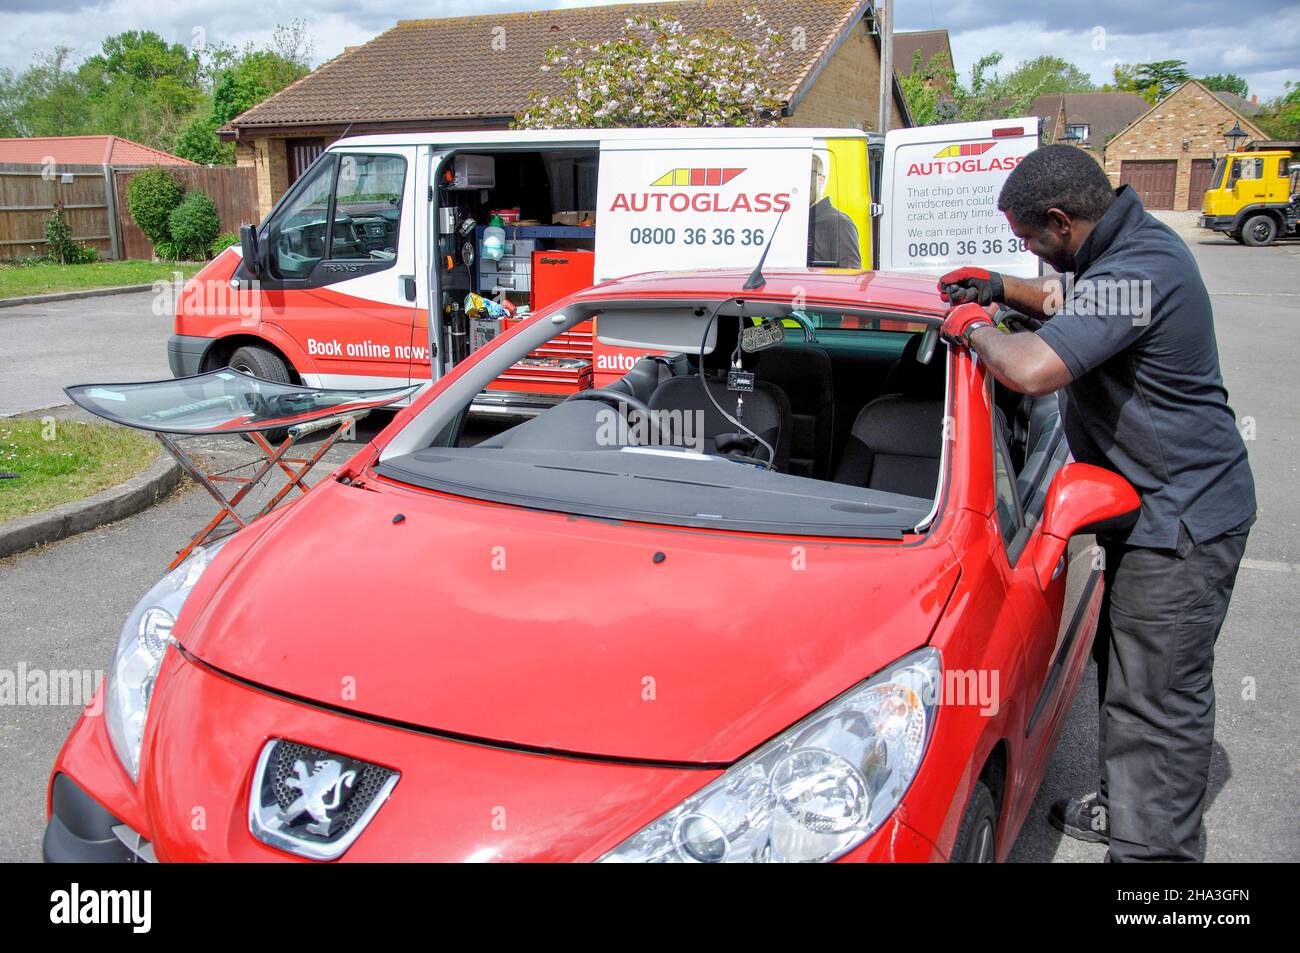 Car windscreen being replaced by Autoglass man, Stanwell Moor, Staines, Middlesex, England, United Kingdom Stock Photo